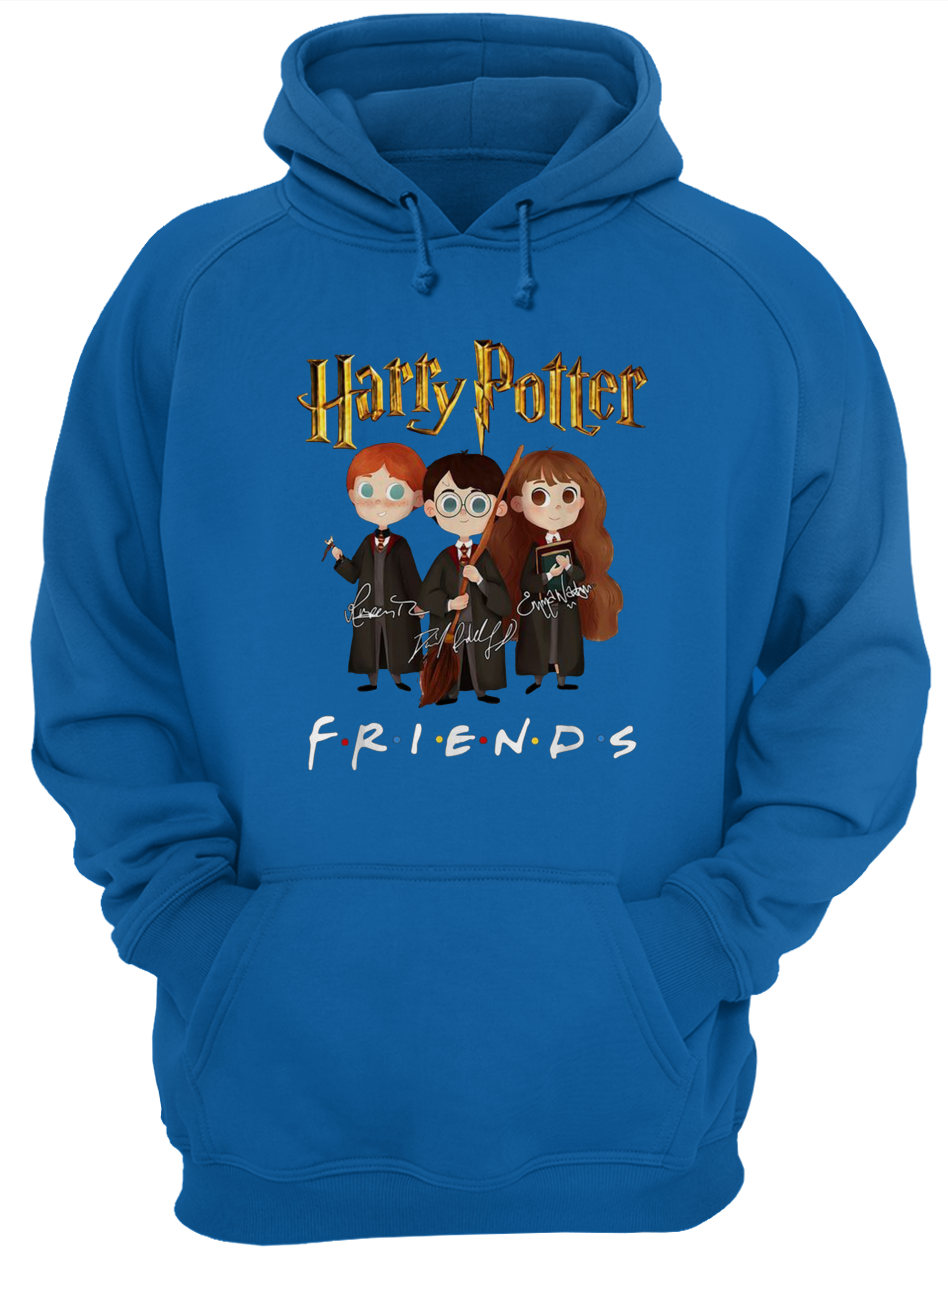 Harry potter characters friends tv show signatures hoodie